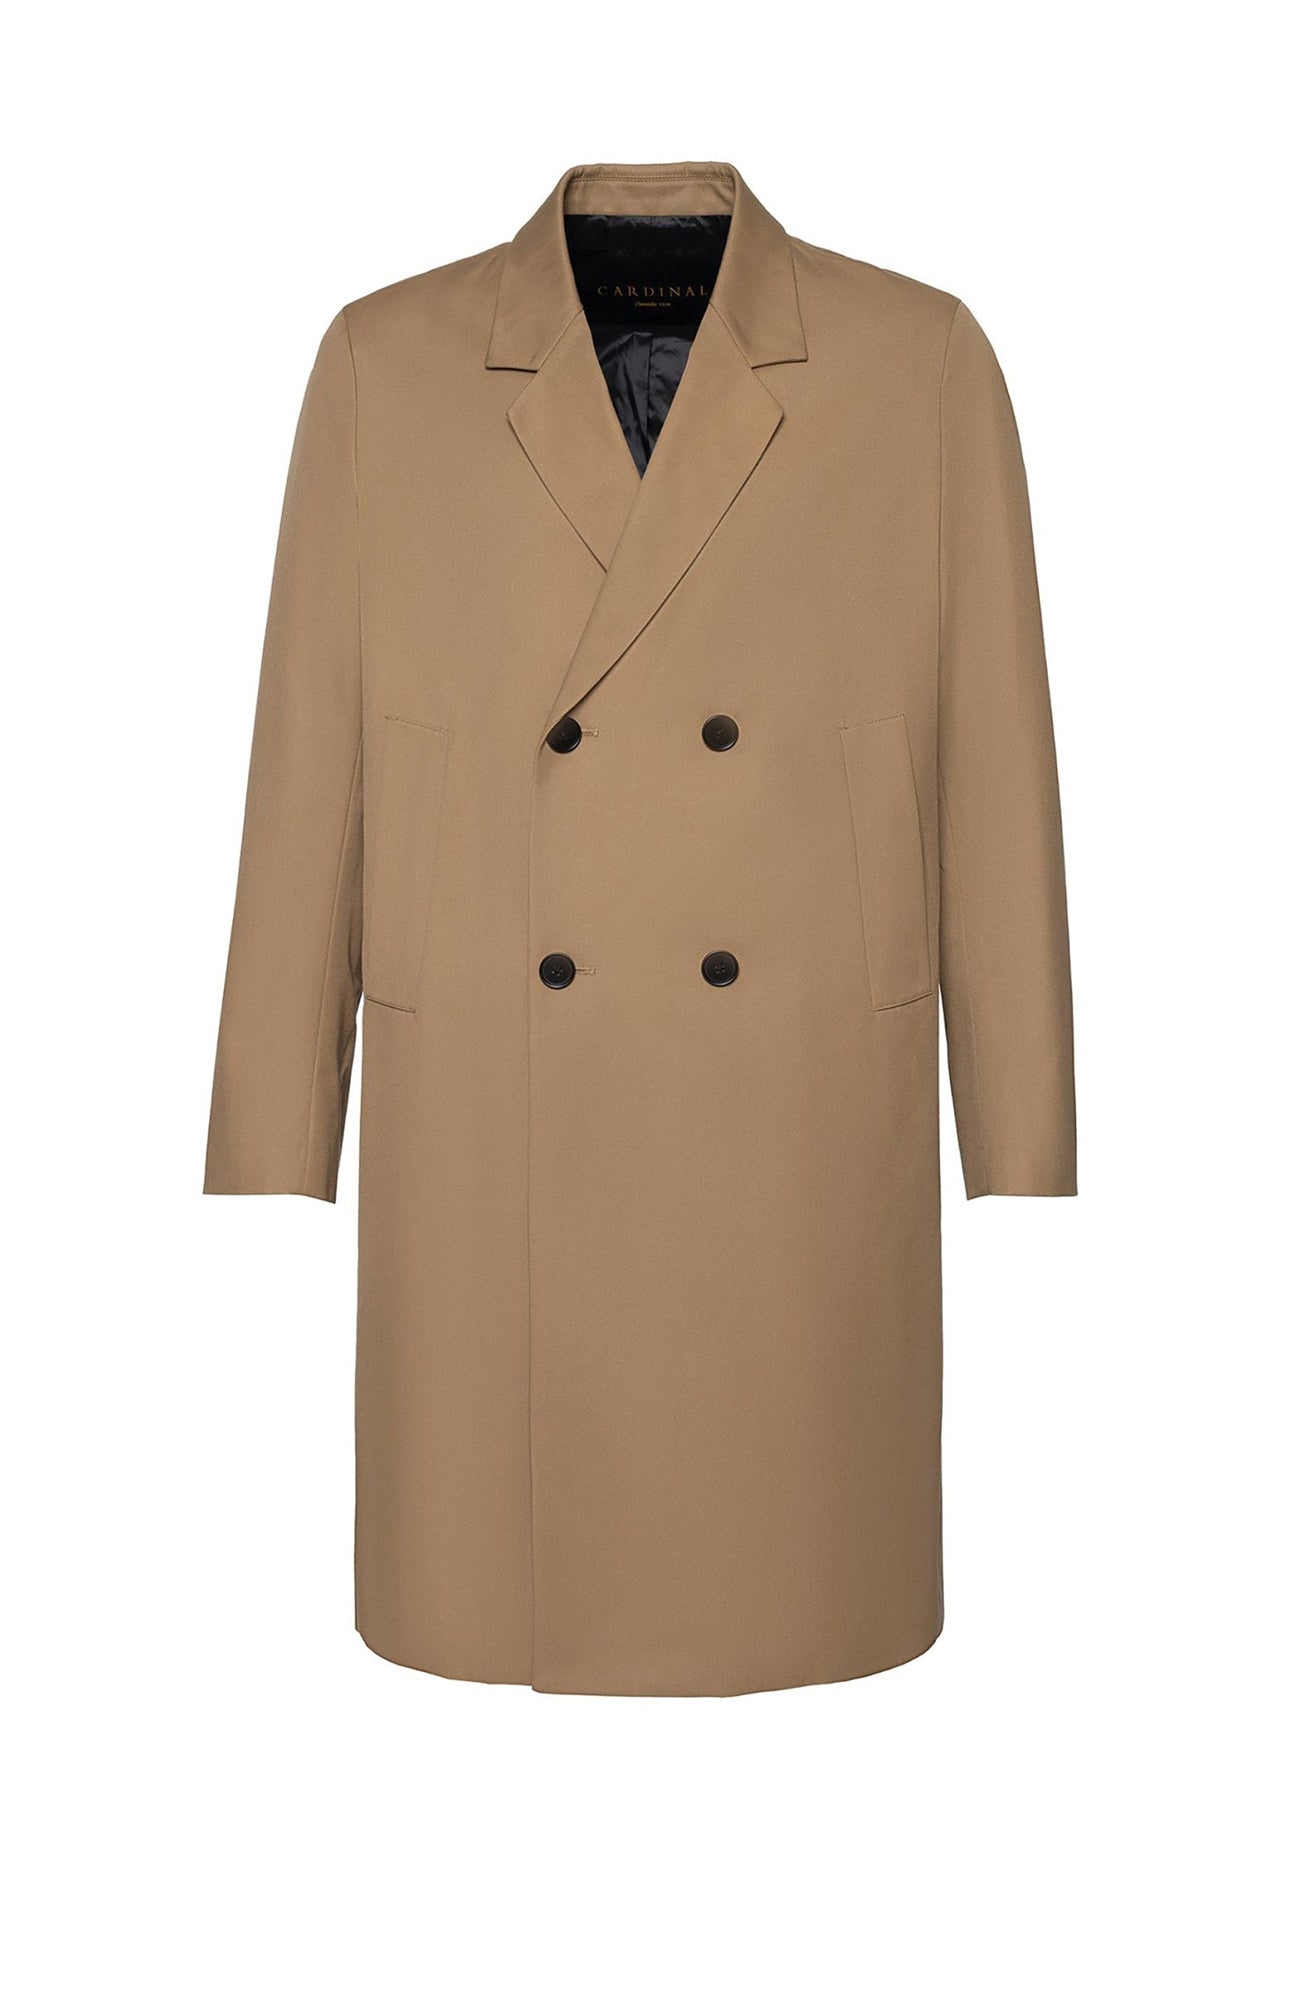 SCOTTSDALE DOUBLE BREAST RELAXED TOPCOAT 41.5 inch length